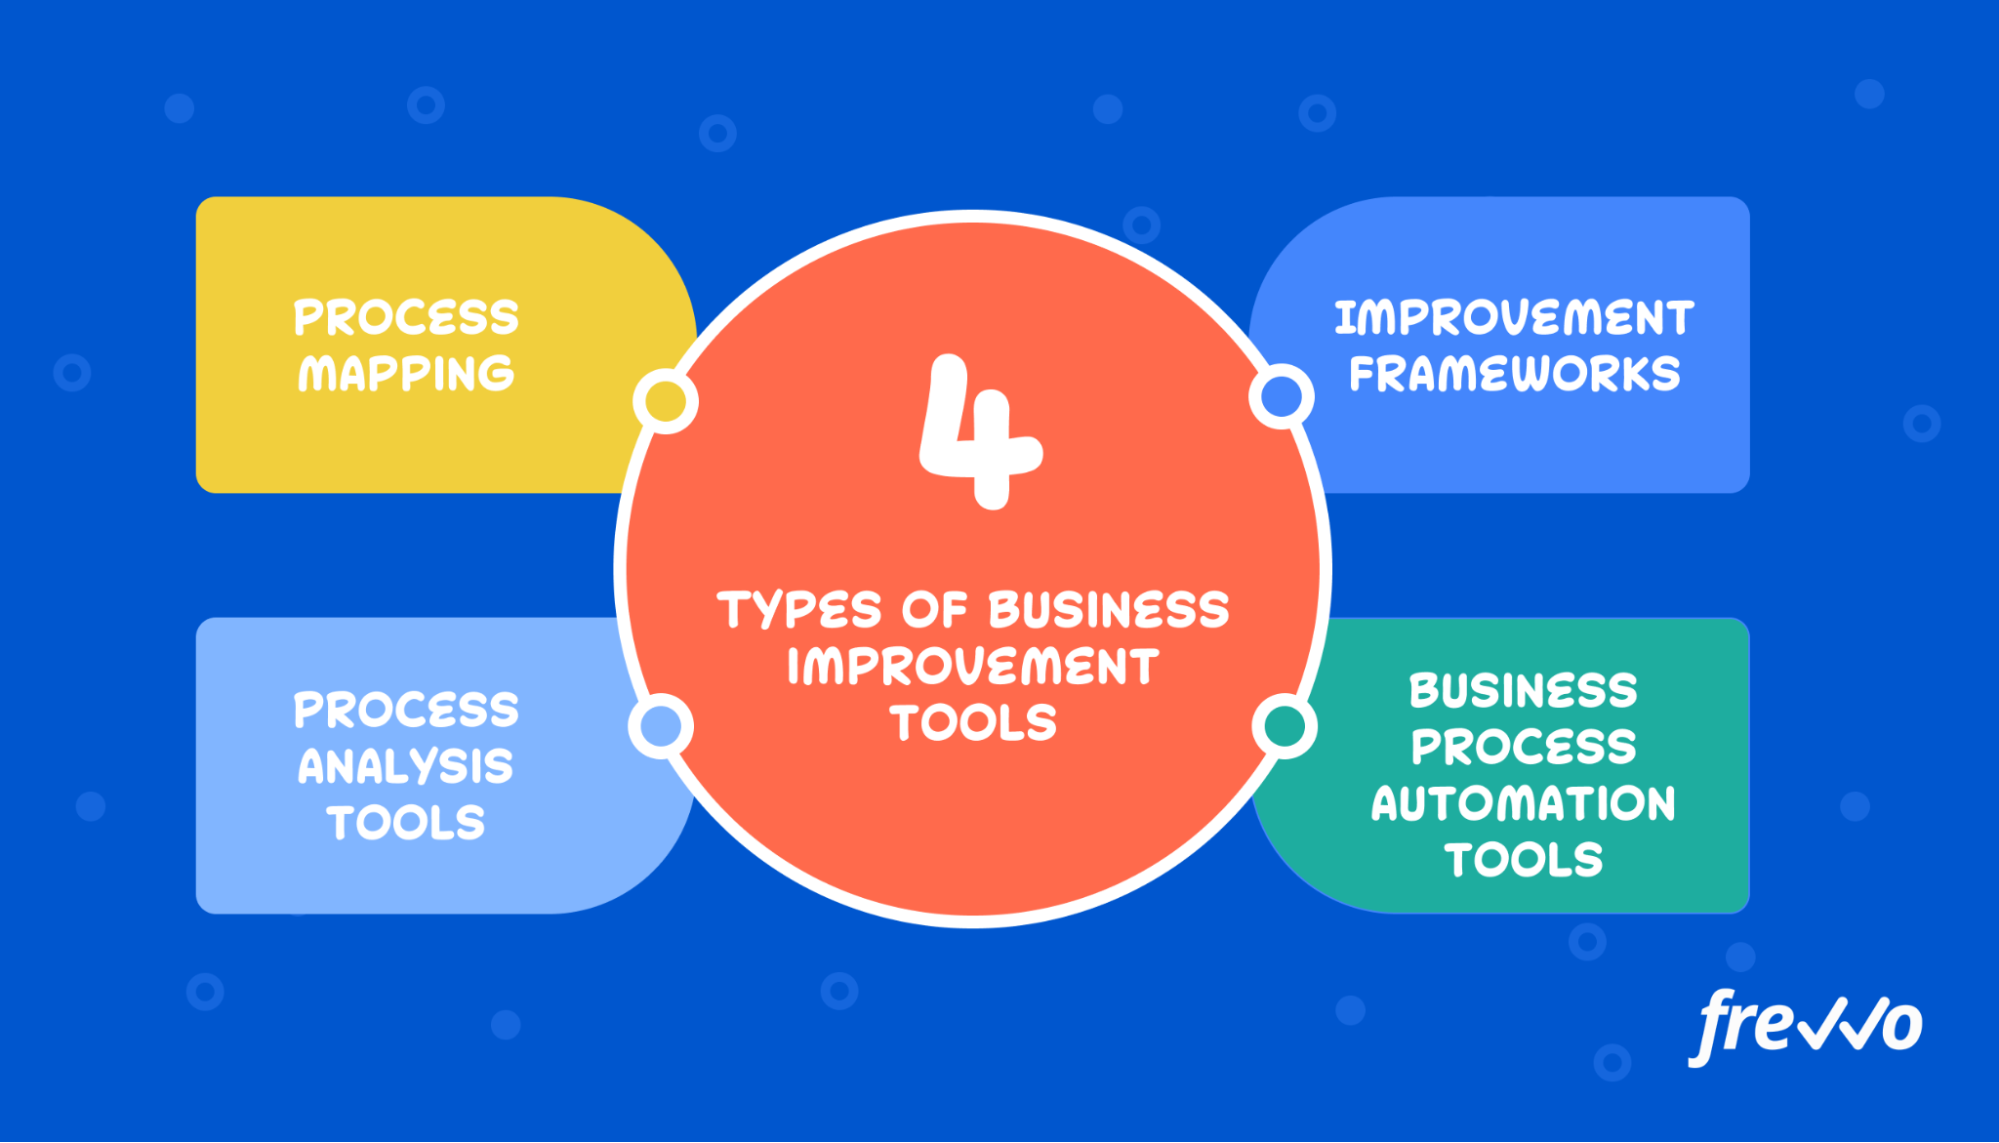 Different types of business improvement tools